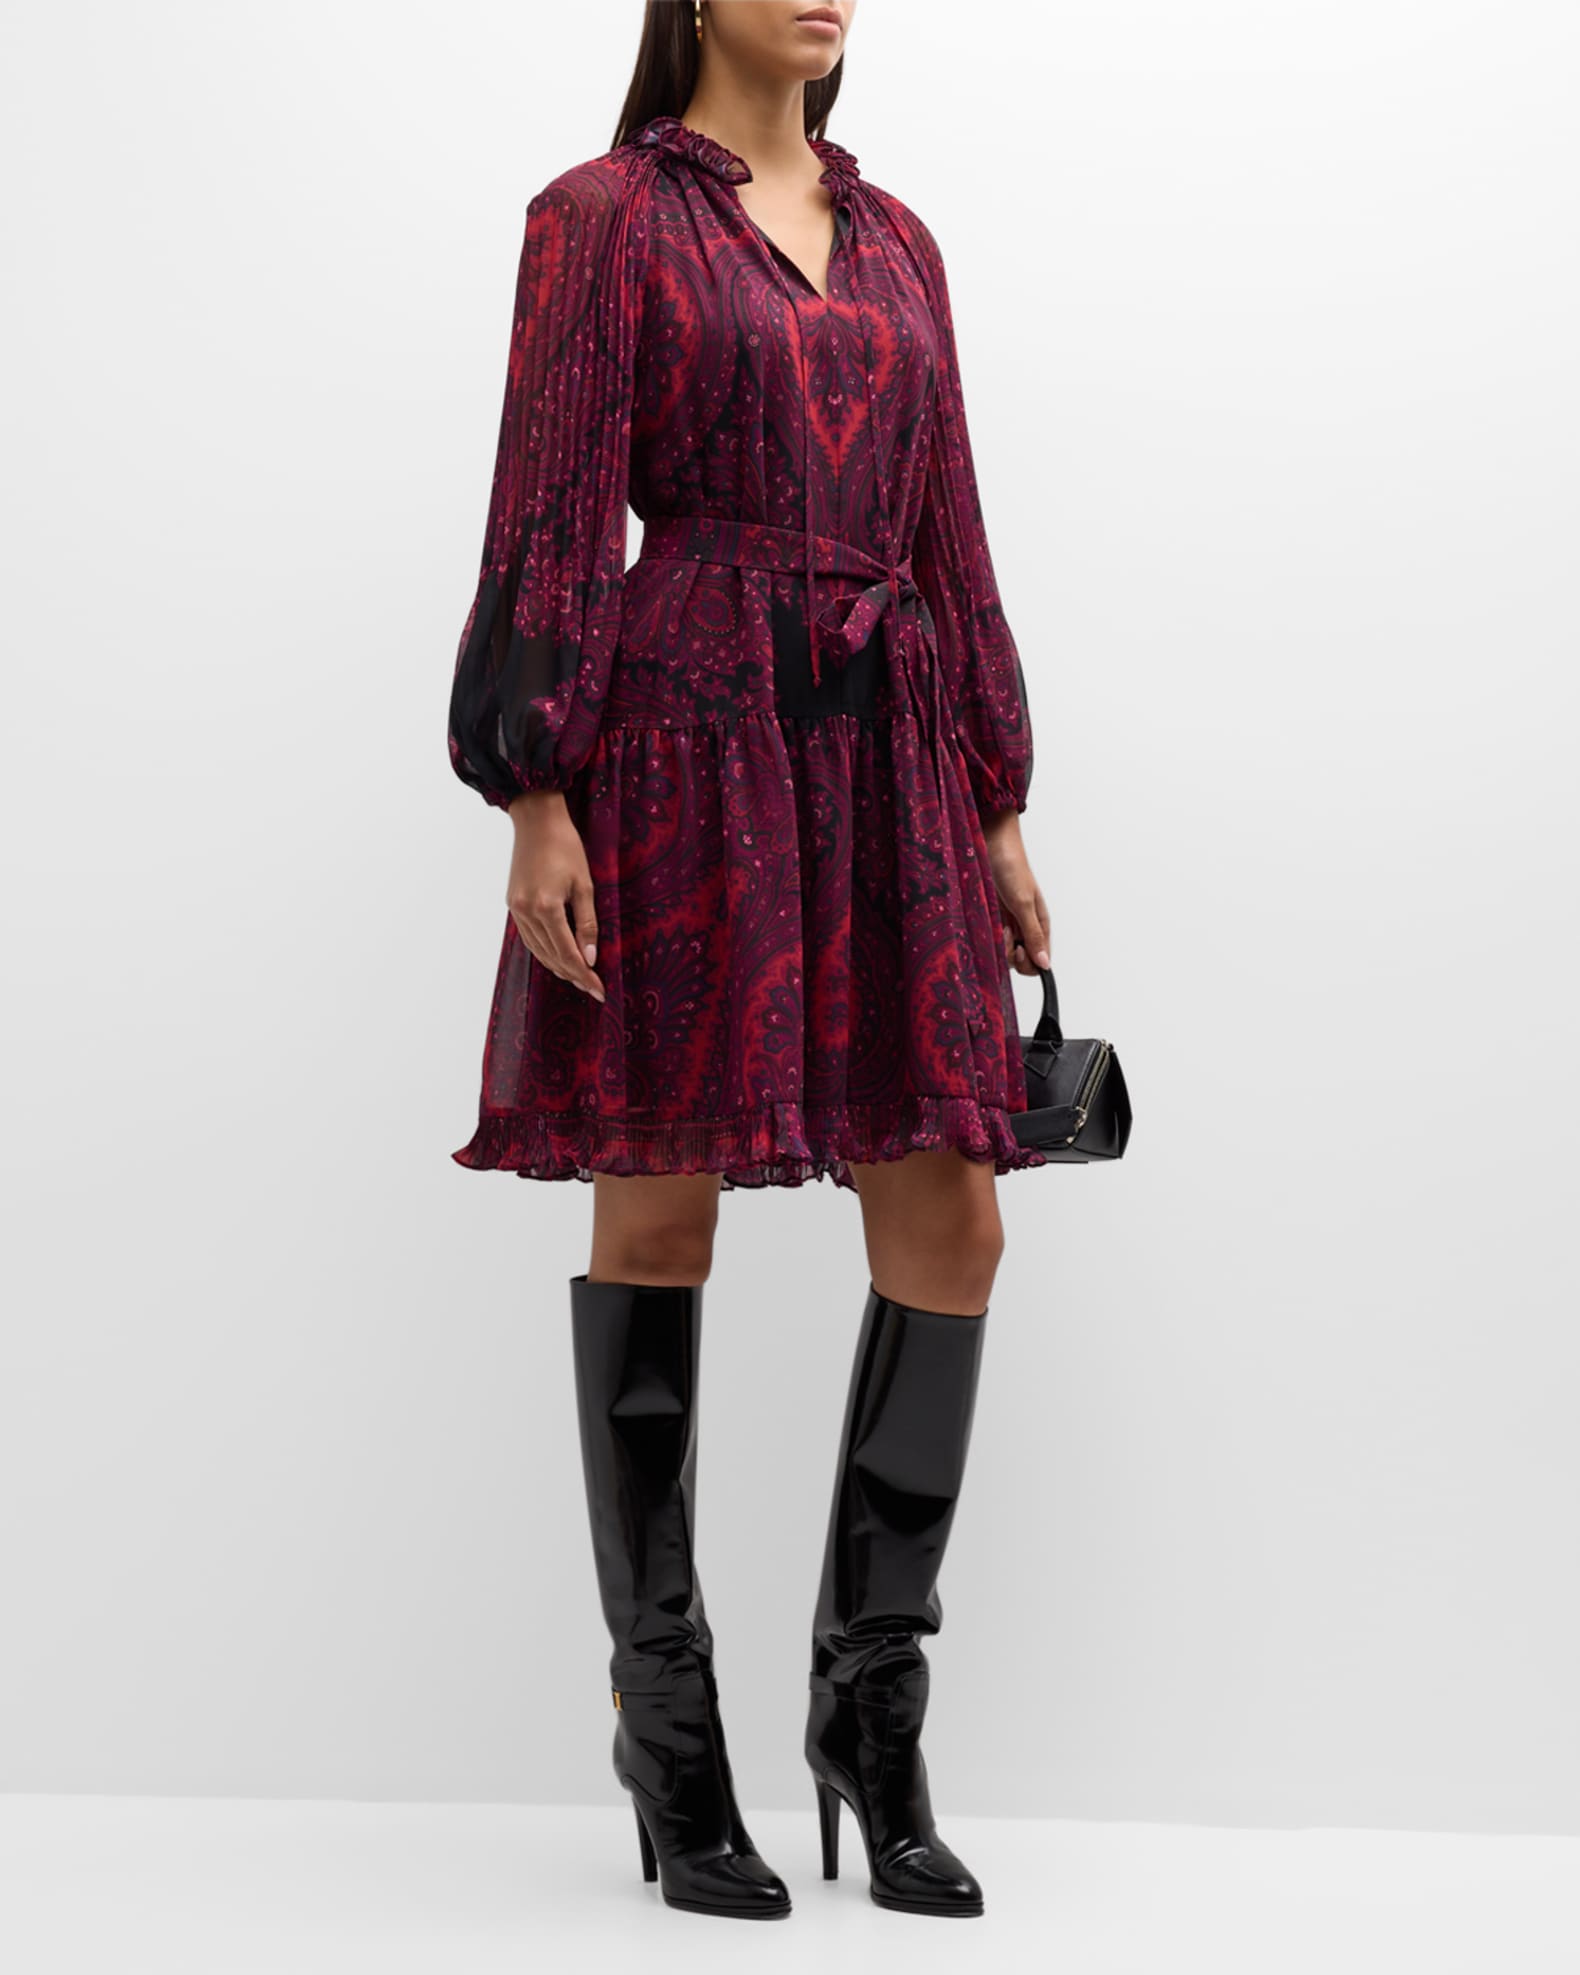 How to Wear Over the Knee Boots with a Midi Dress - Lizzie in Lace